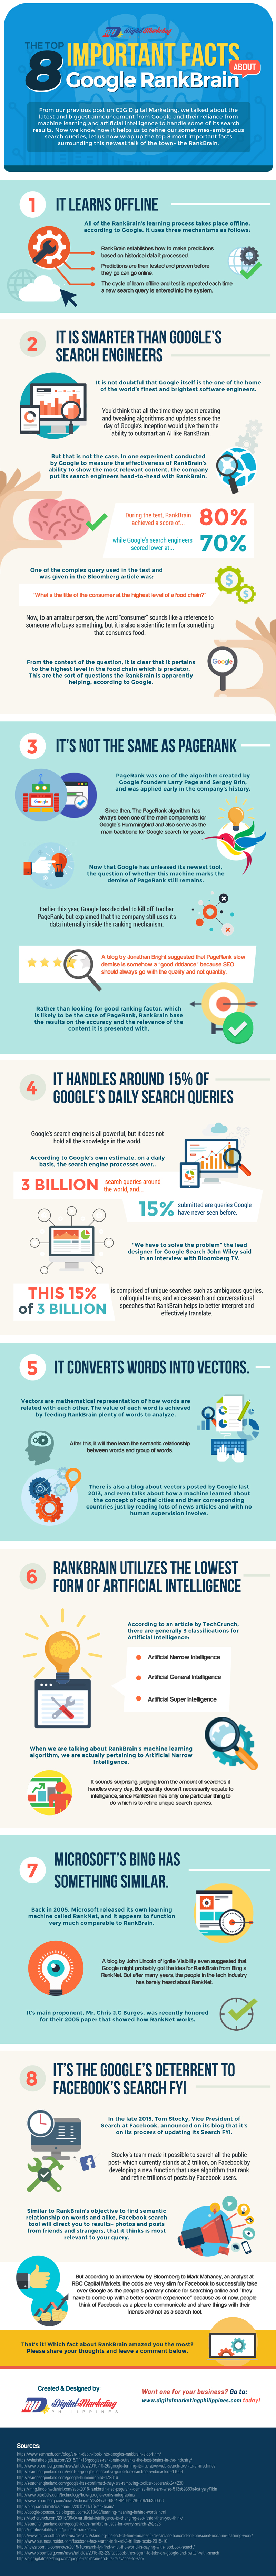 The Top 8 Important Facts about Google RankBrain (Infographic) - An Infographic from Digital Marketing Philippines